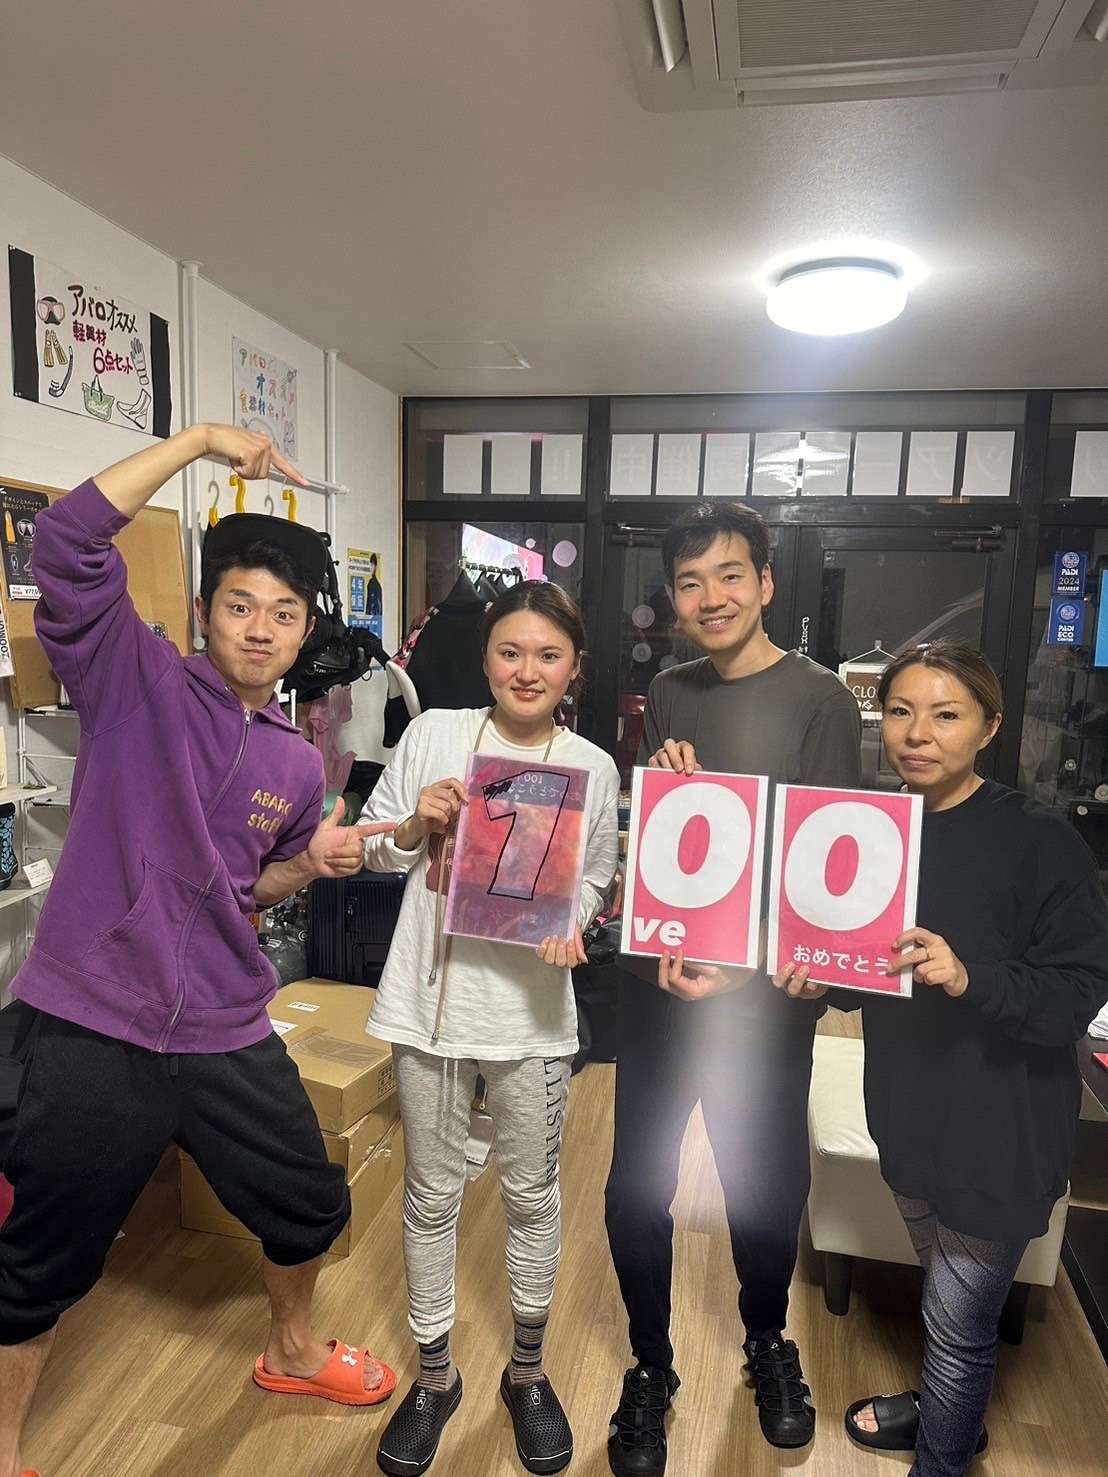 You are currently viewing 100ダイブおめでとう御座います🥳